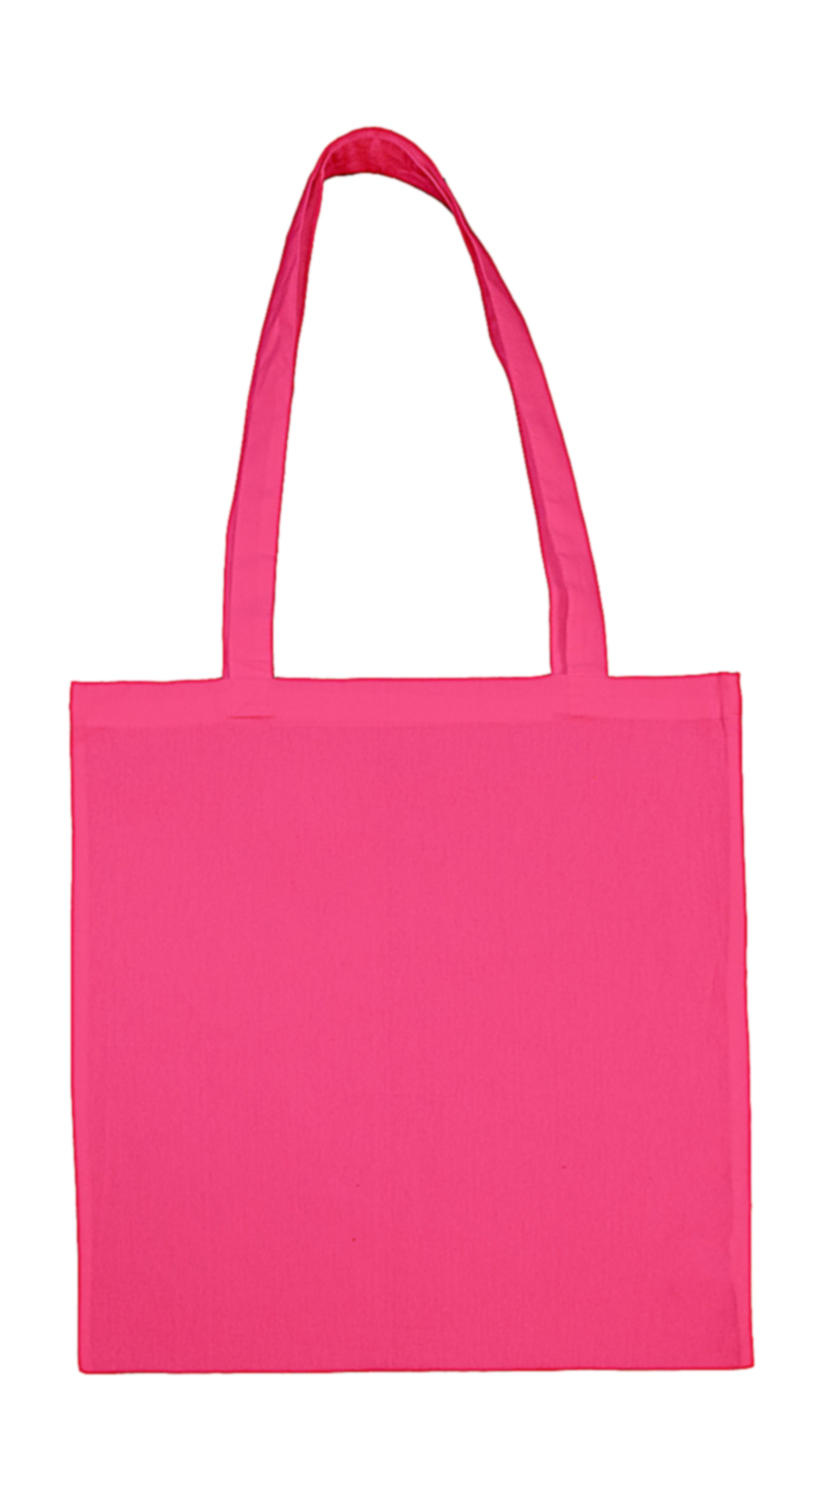  Cotton Bag LH in Farbe Pink